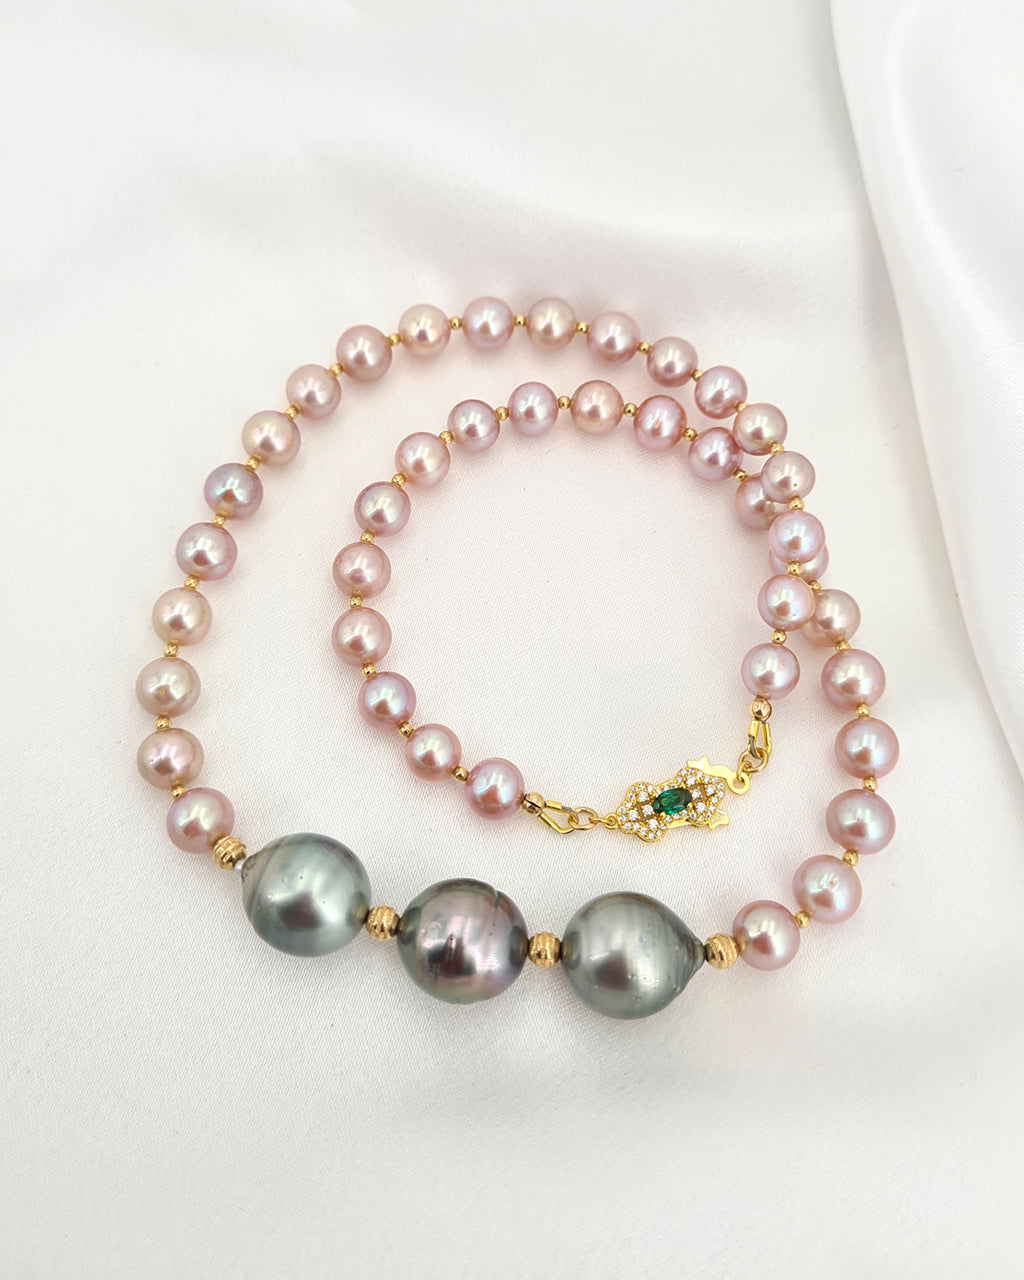 Tahitian Pearls with Freshwater Pearl Strand Necklace | Handmade Pearl Jewelry | Singapore